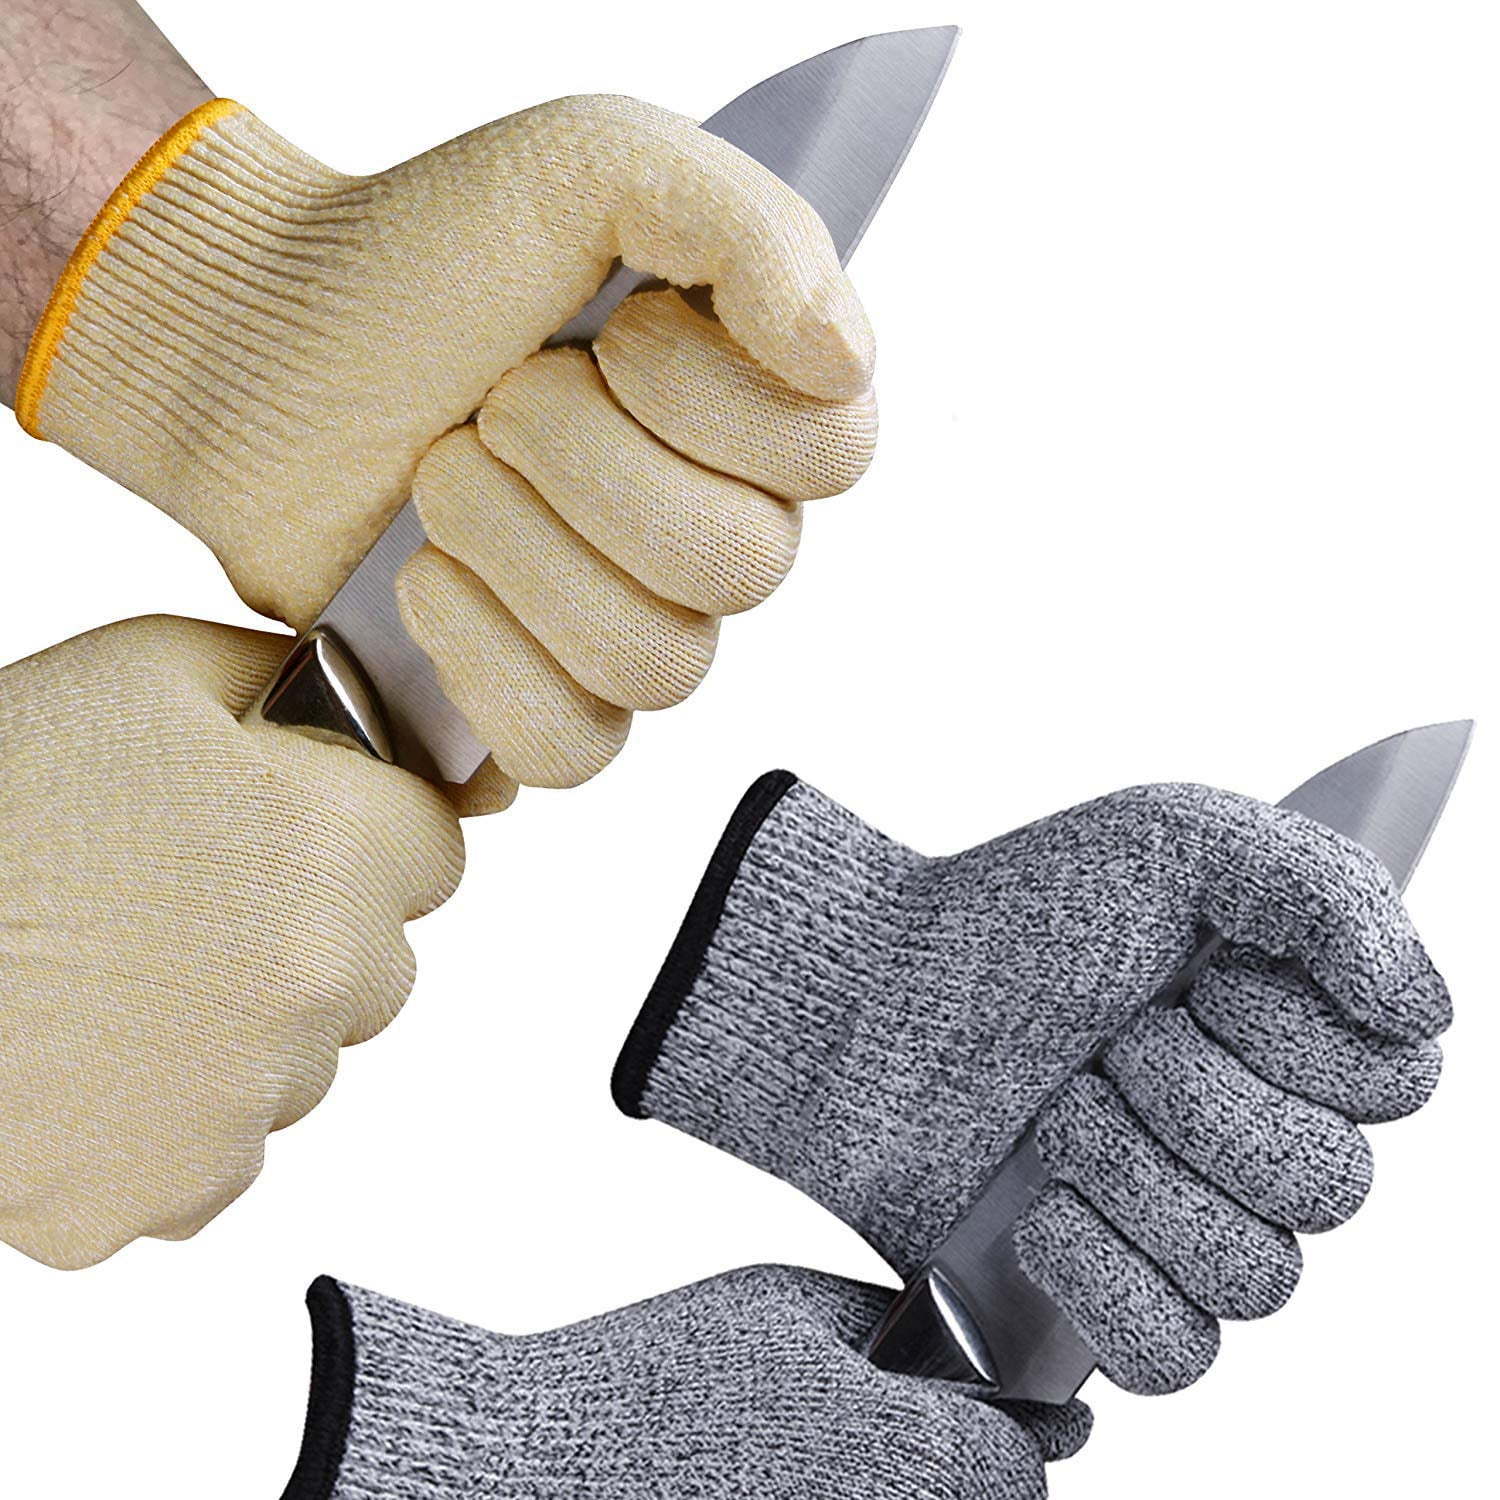 HereToGear Cut Resistant Gloves - 2 PAIRS XXL - Food Grade, Level 5  Protection - Safety while Chopping Vegetables or Cleaning Fish 